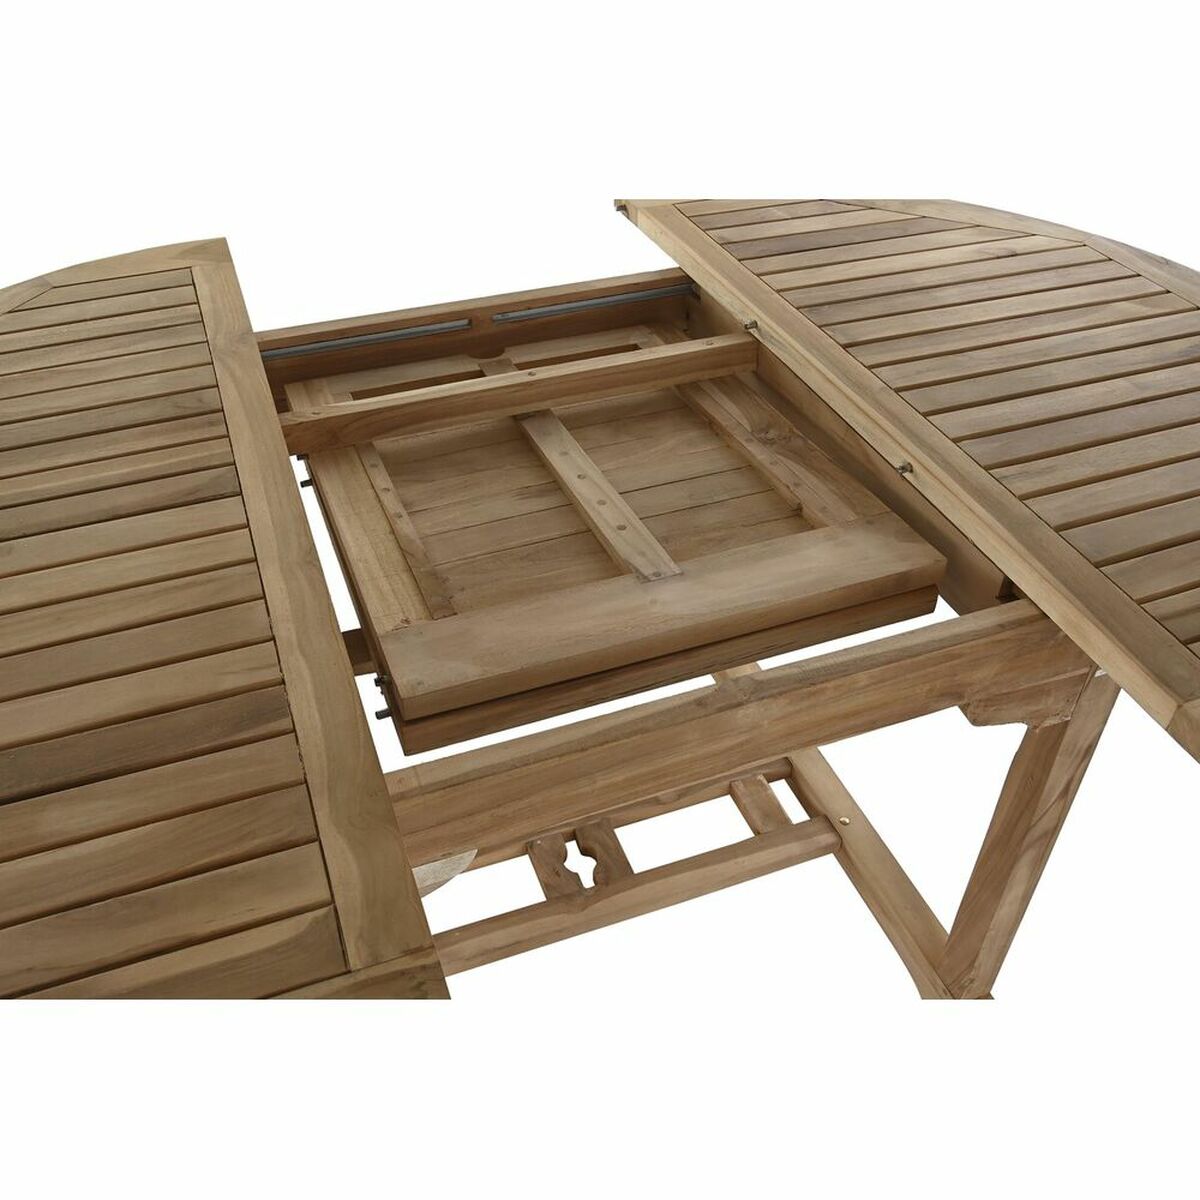 Table set with 4 chairs DKD Home Decor Green Teak (120 x 120 x 75 cm) (5 pcs)  